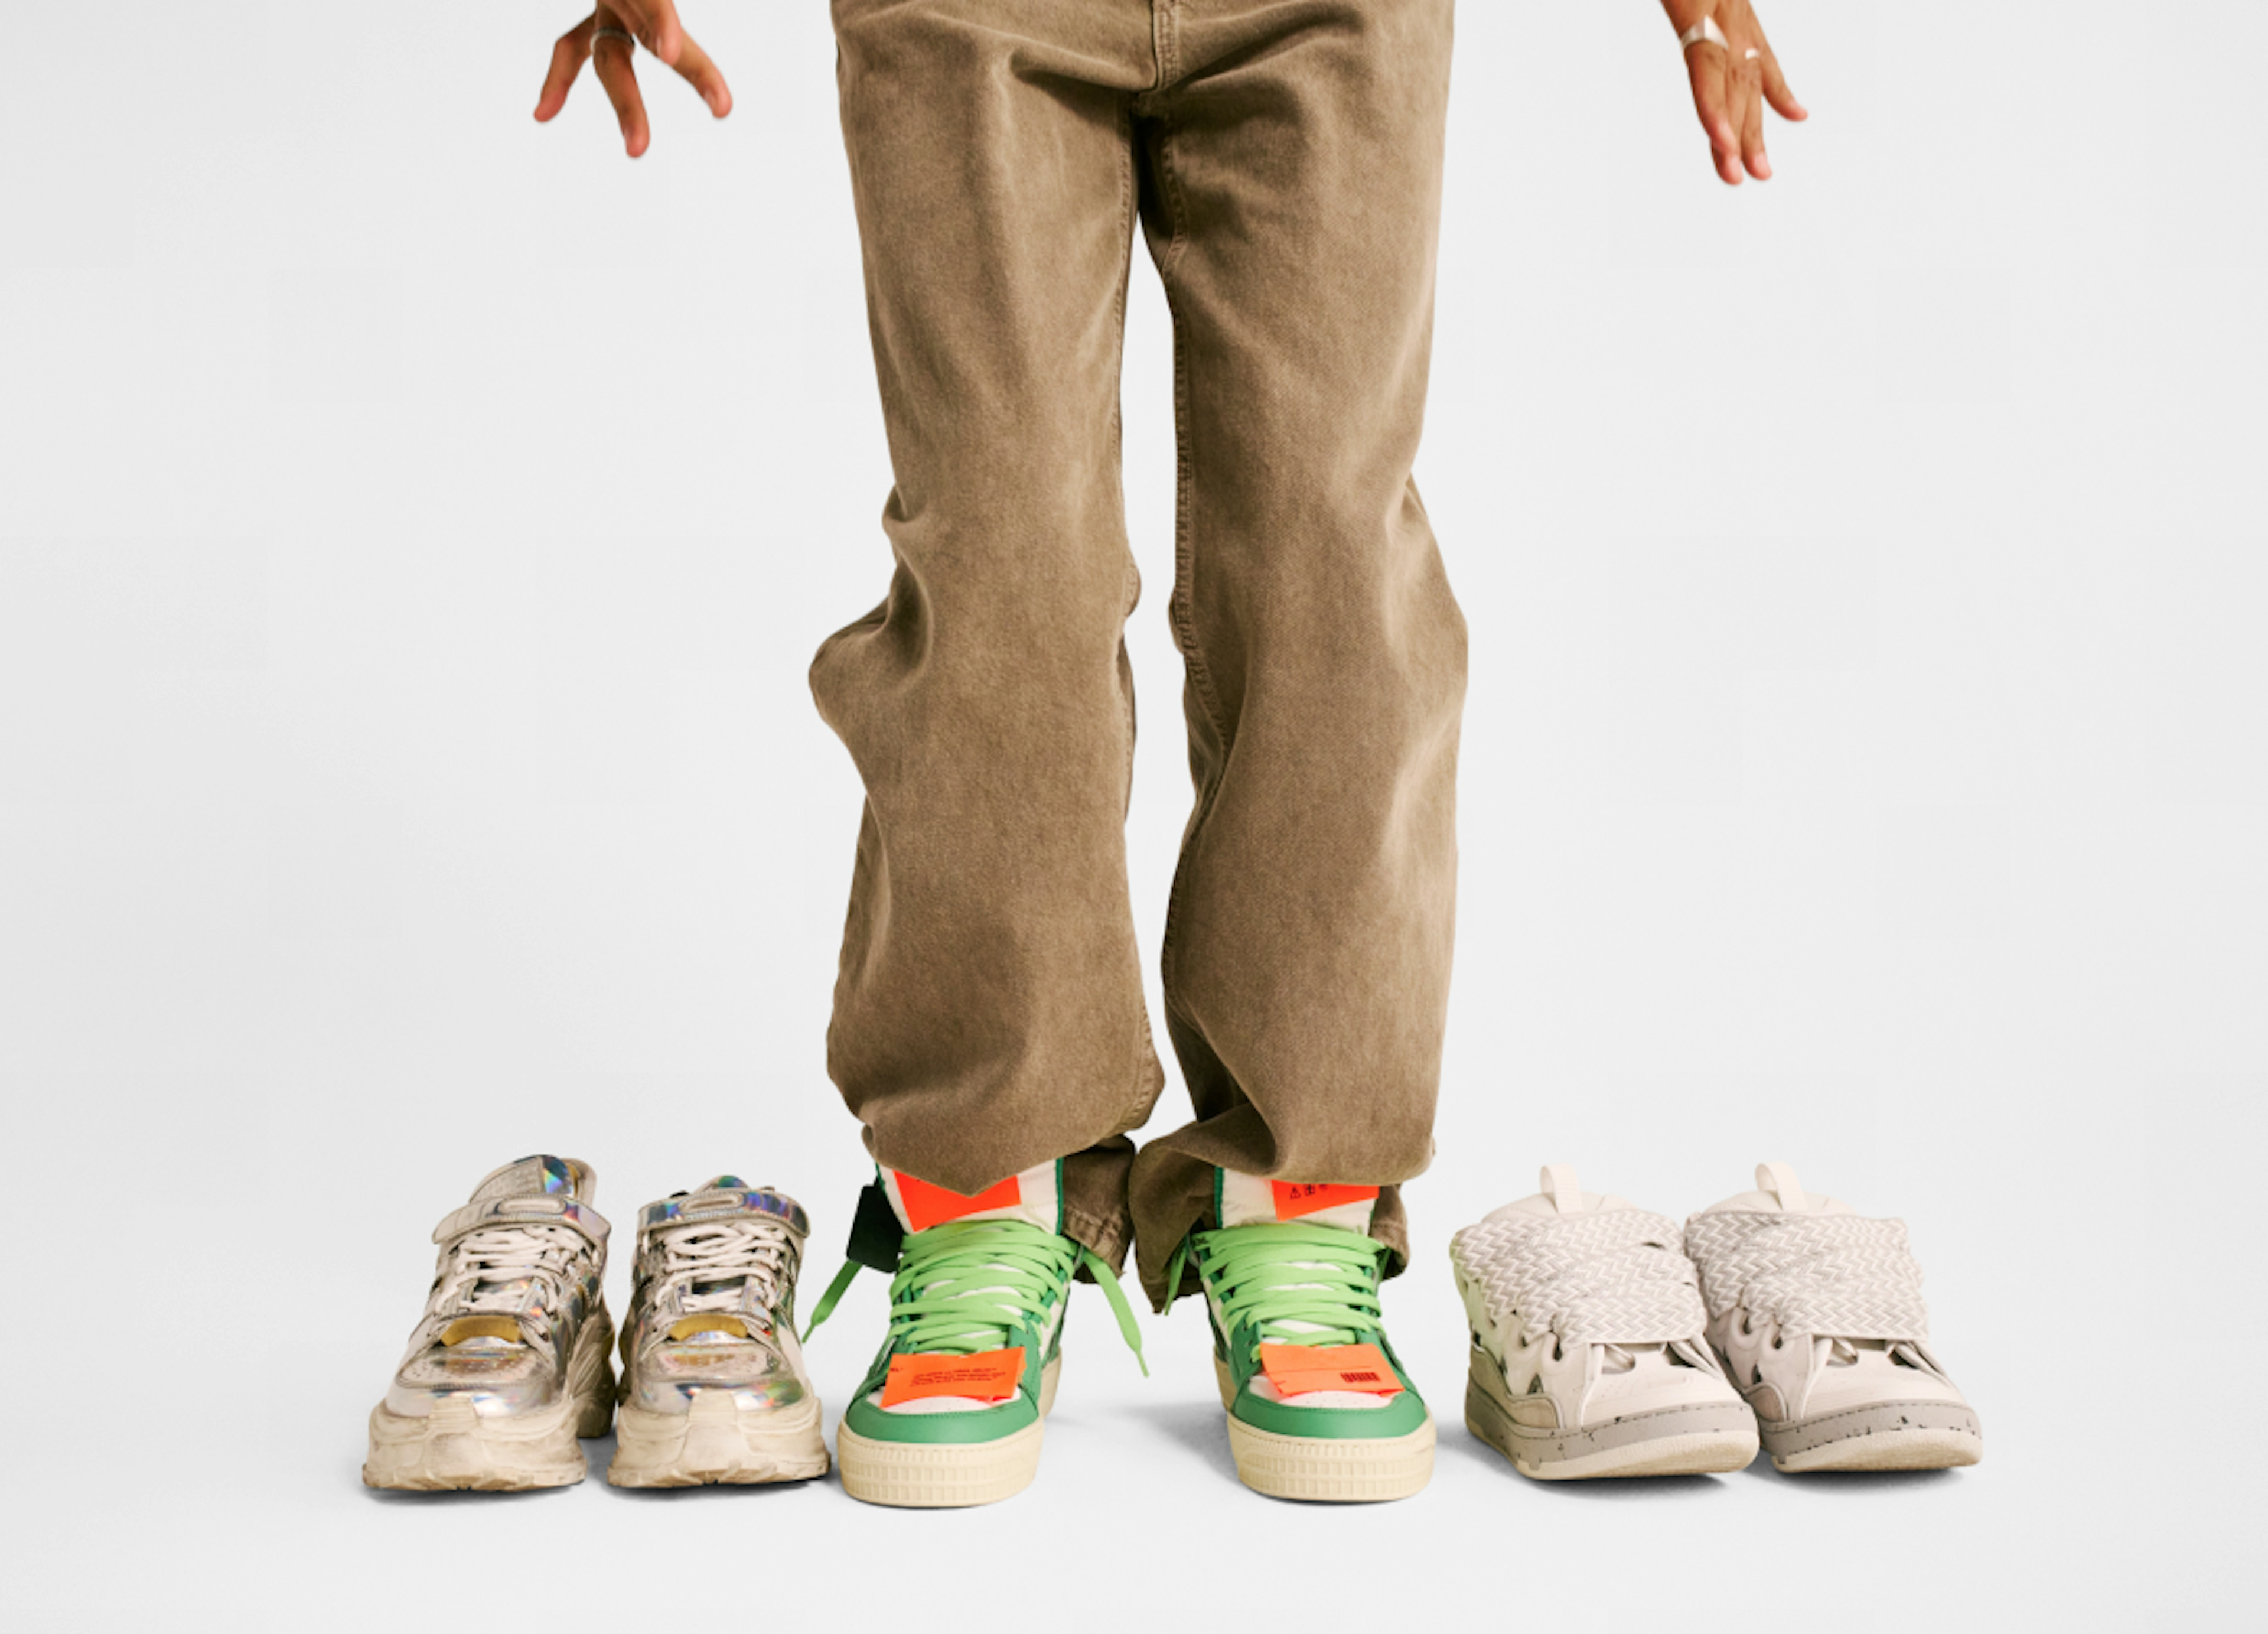 Three pairs of shoes neatly arranged next to each other on the ground. Someone wearing brown jeans is wearing the pair in the center.